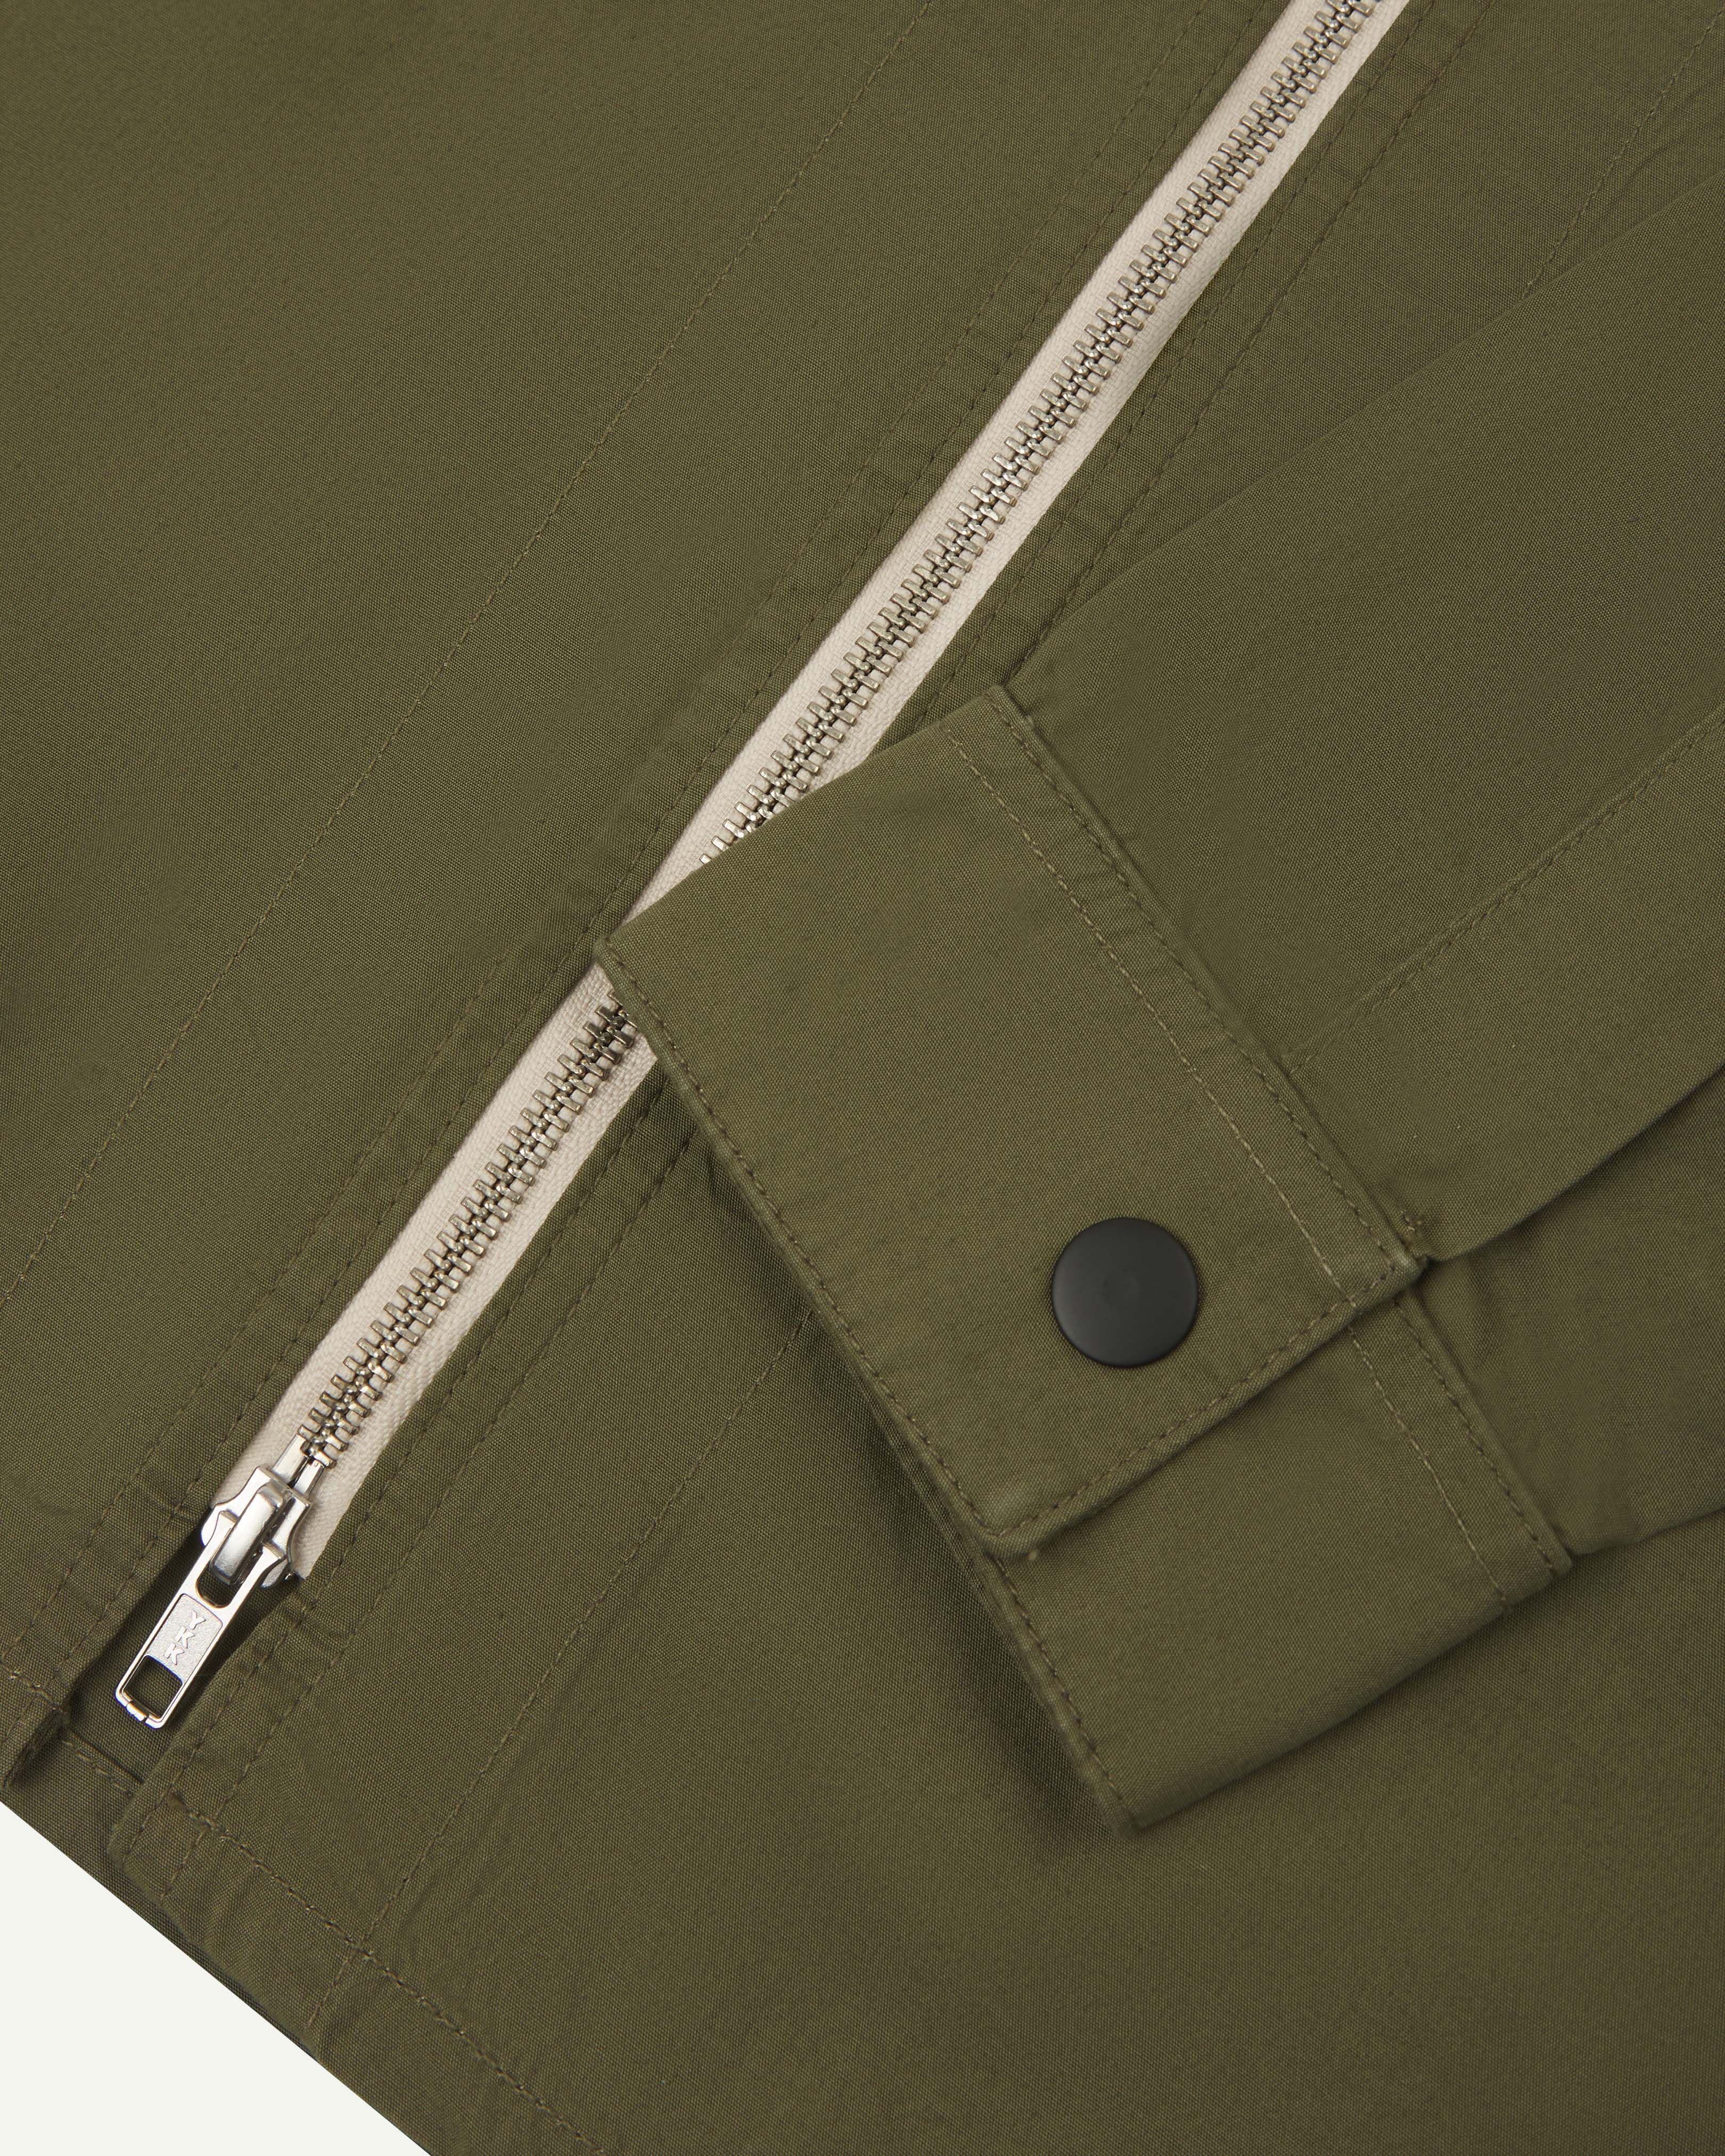 Close-up view of uskees zip front lightweight men's jacket in olive green showing the contrast zip and black popper fastening on cuff.